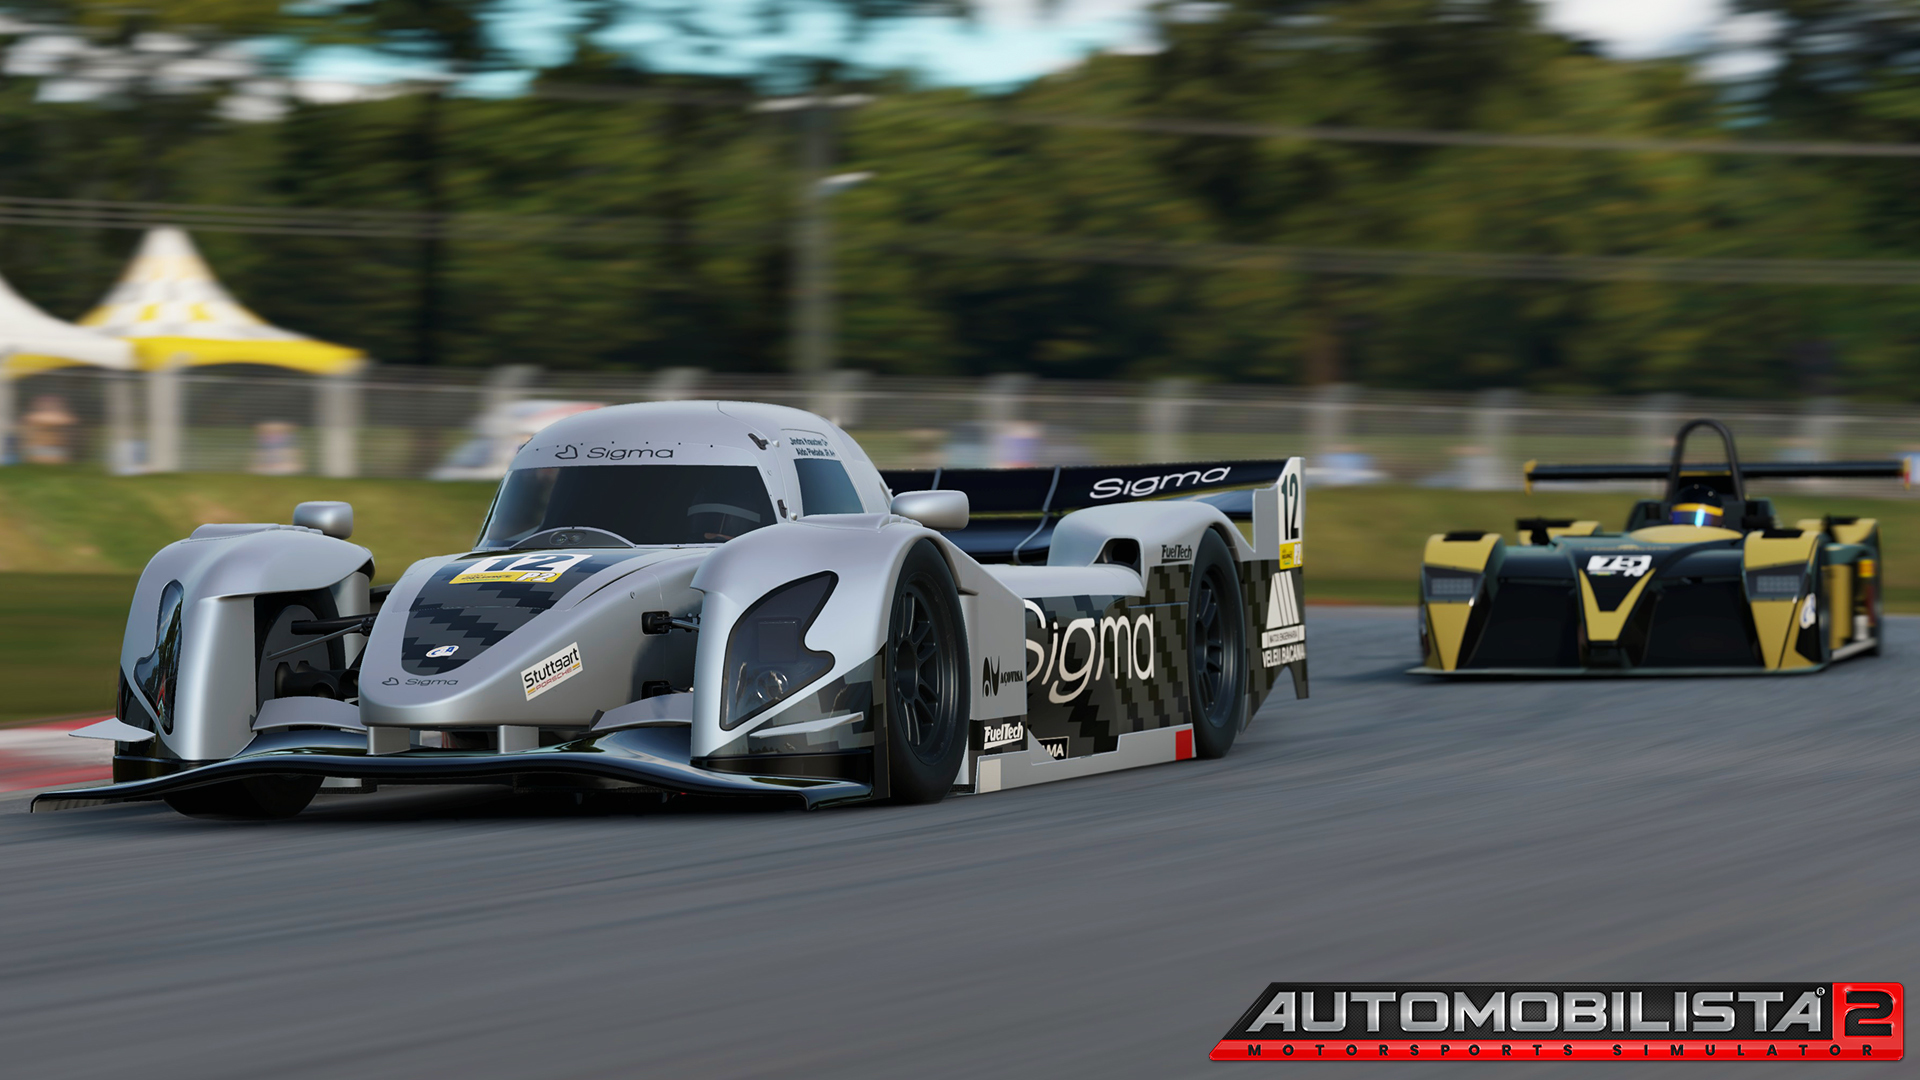 May 15, 2020 Automobilista 2 V0.9.2.1 RELEASED! Automobilista 2 - Reiza Studios This update is largely focused on FFB, physics and AI developments, but it features a large assemble of improvements & fixes in all fronts, adds the option to save ...